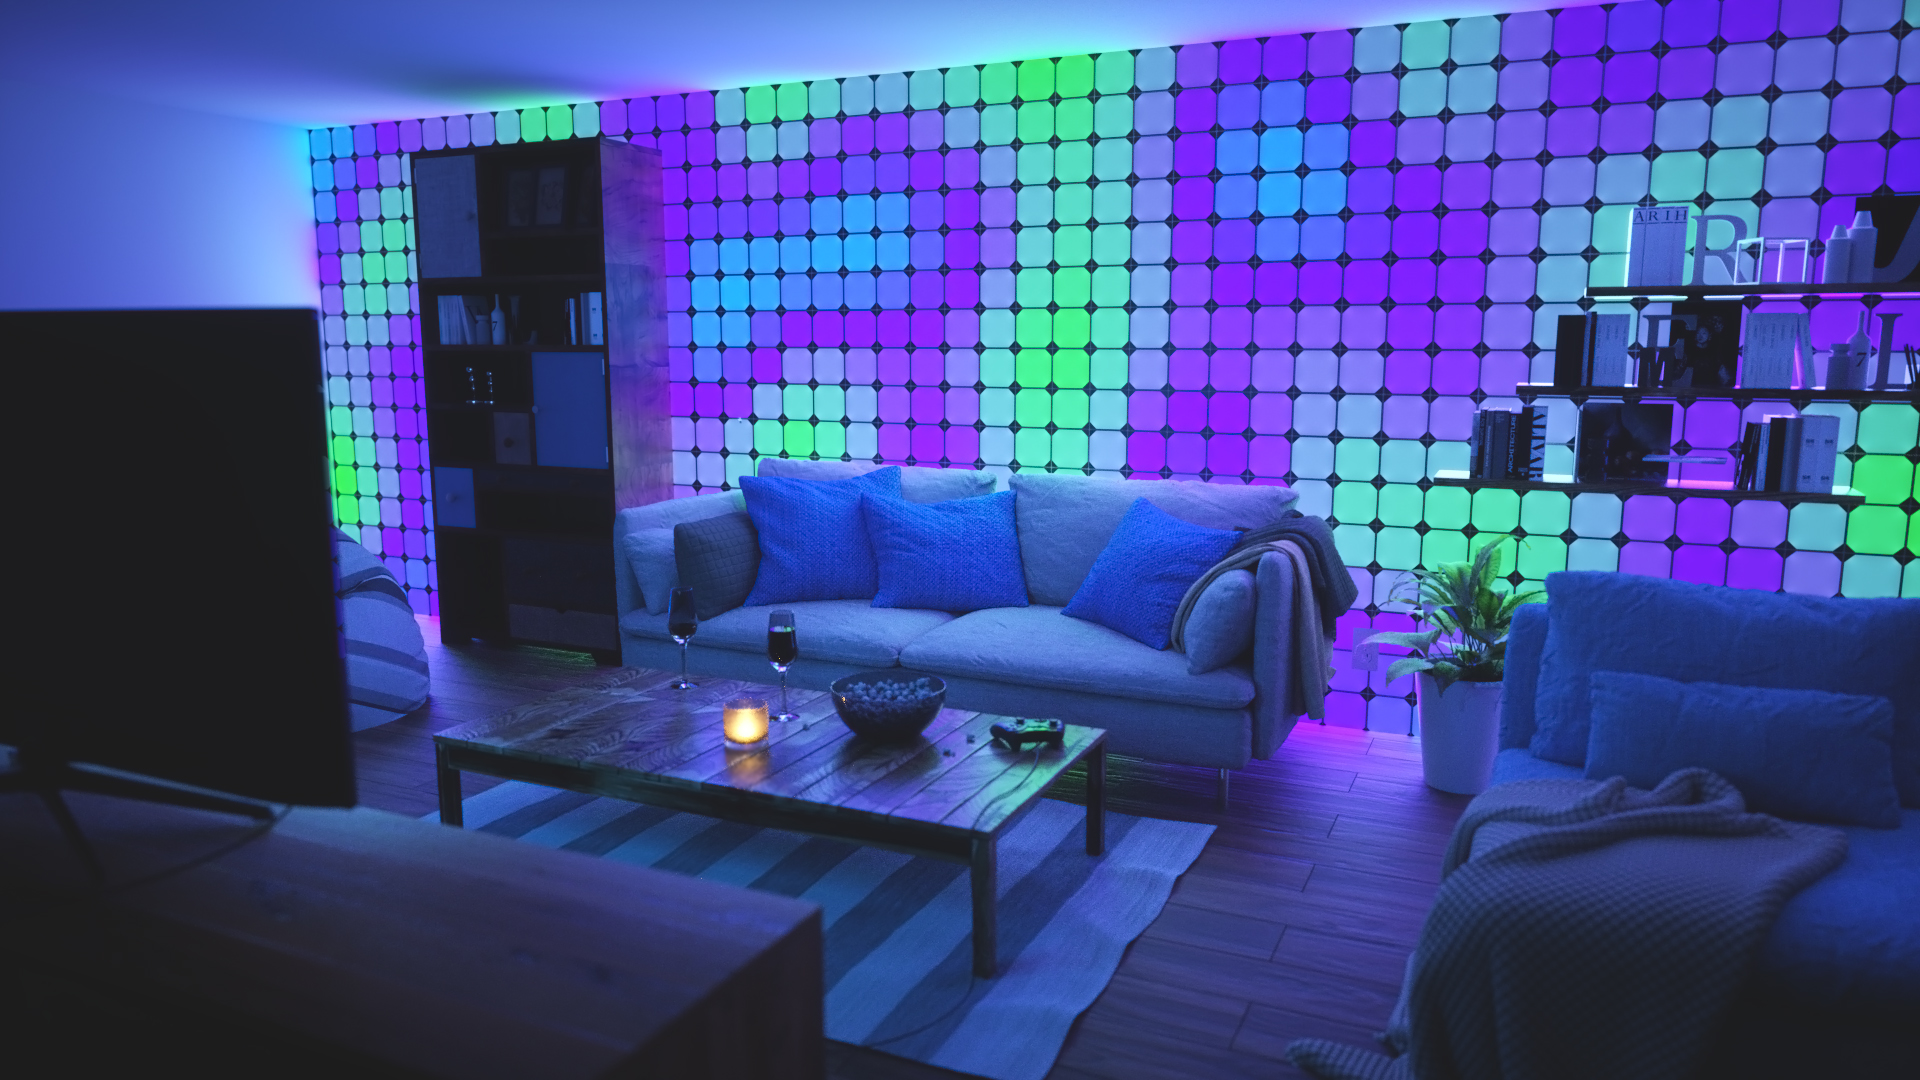 The Nanoleaf Canvas Will Up Your Entire Wall | Digital Trends